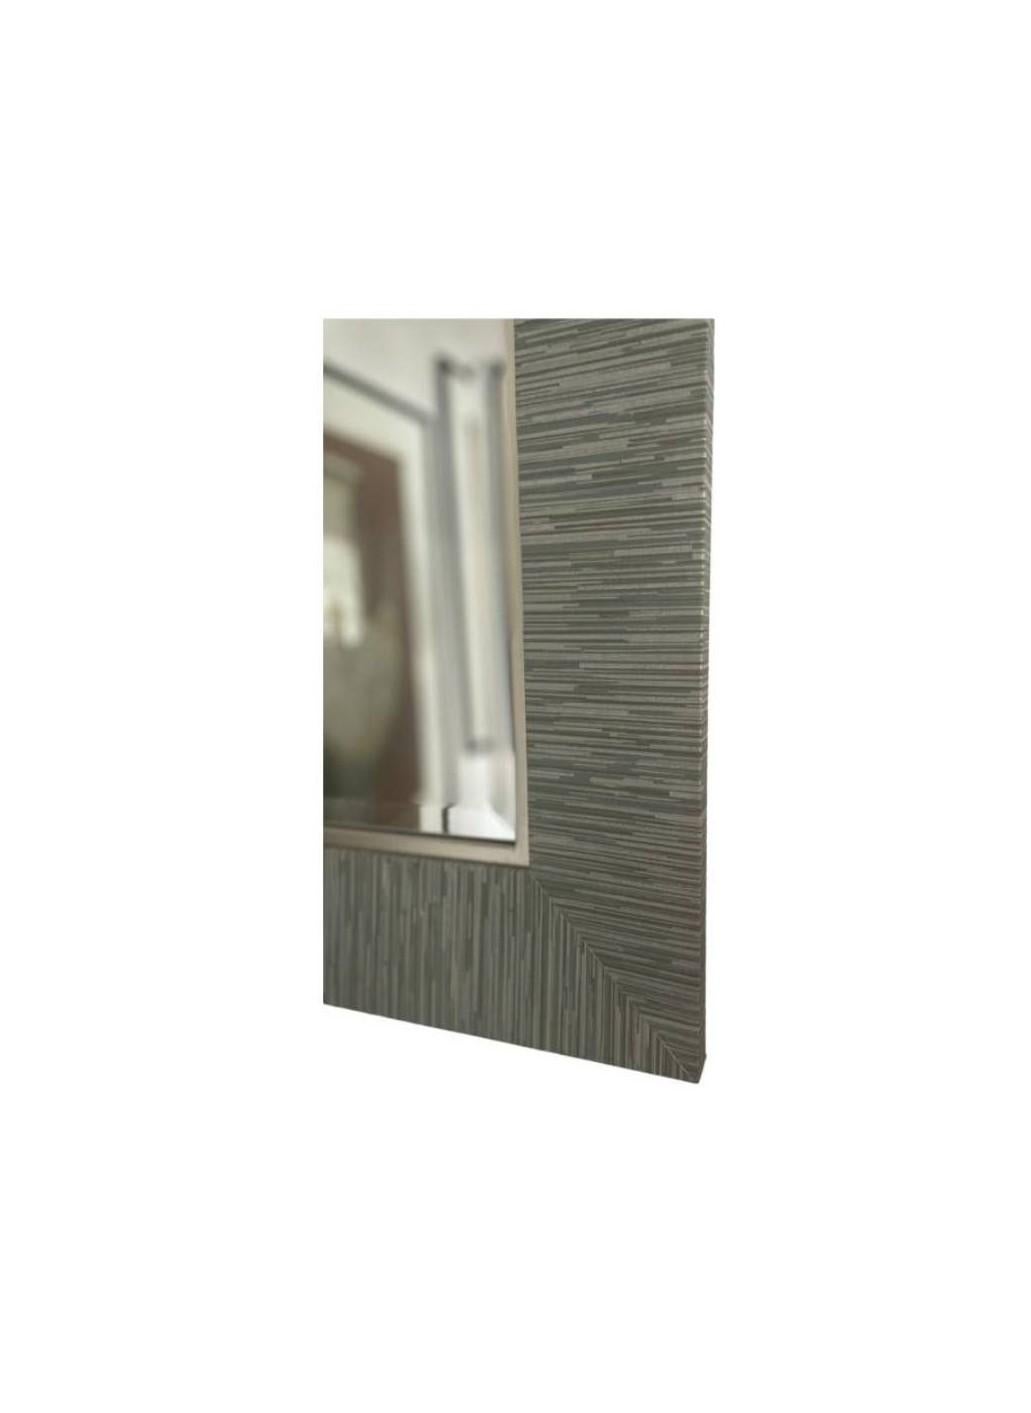 American Blue-green-gray-silver Texture Wrapped Wall Mirror For Sale